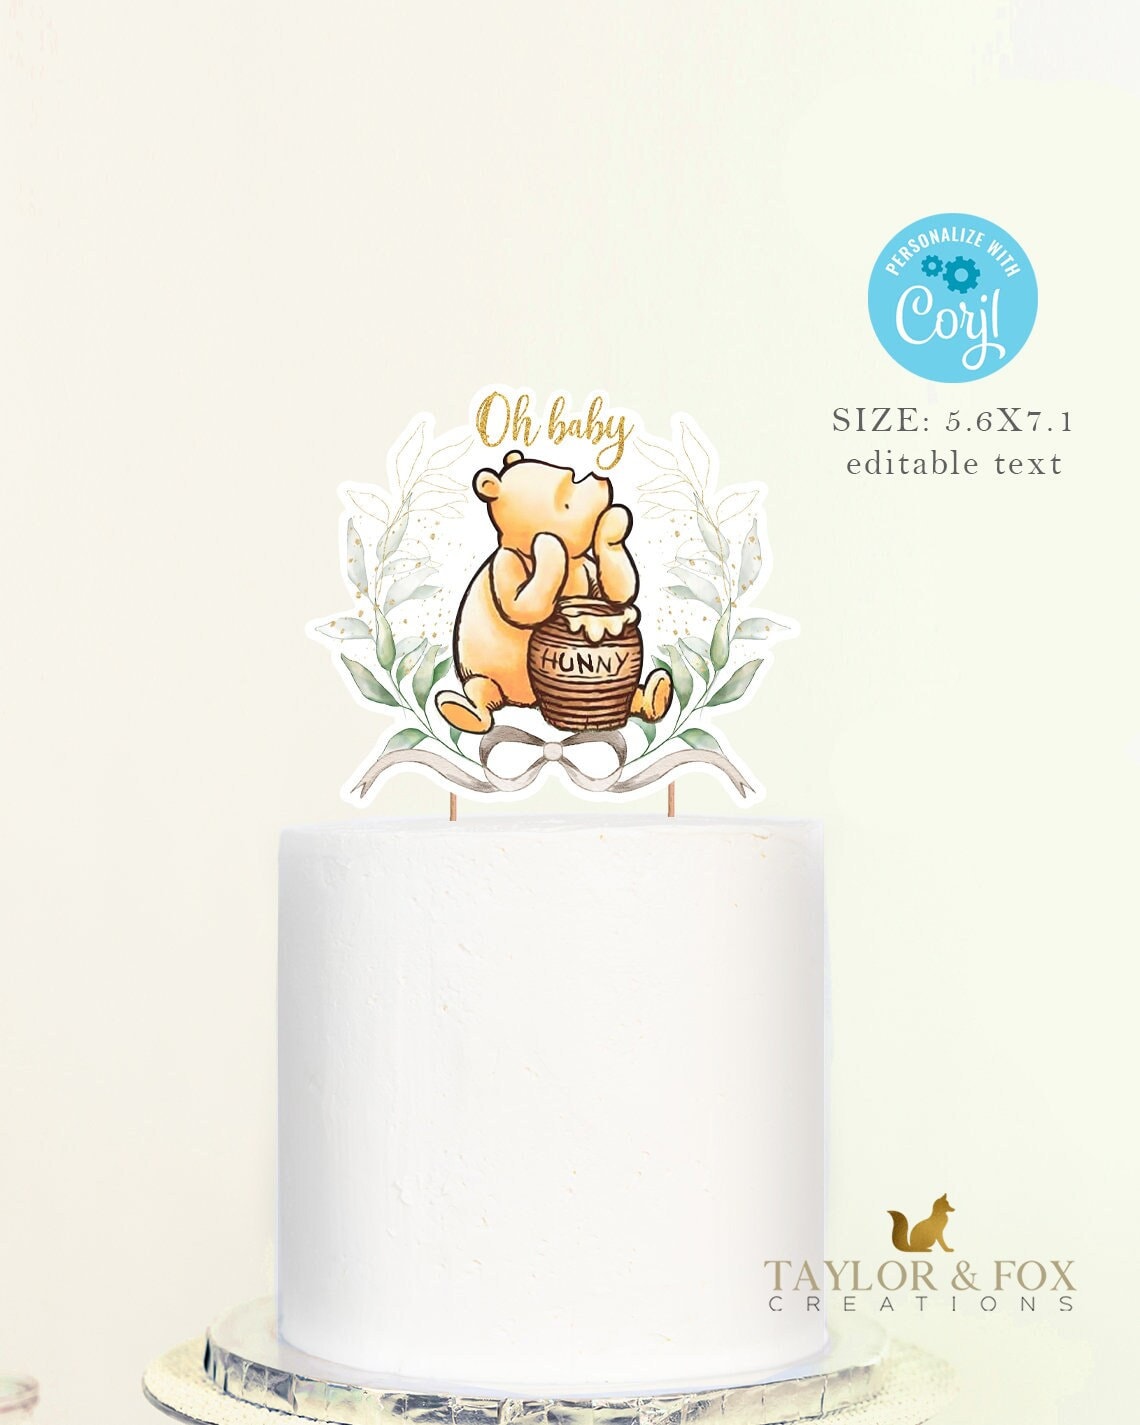 Winnie the Pooh Centerpieces Baby Shower Decoration Hunny Rabbit Tigger Roo  Decor Cutouts Cake Topper Printable Digital